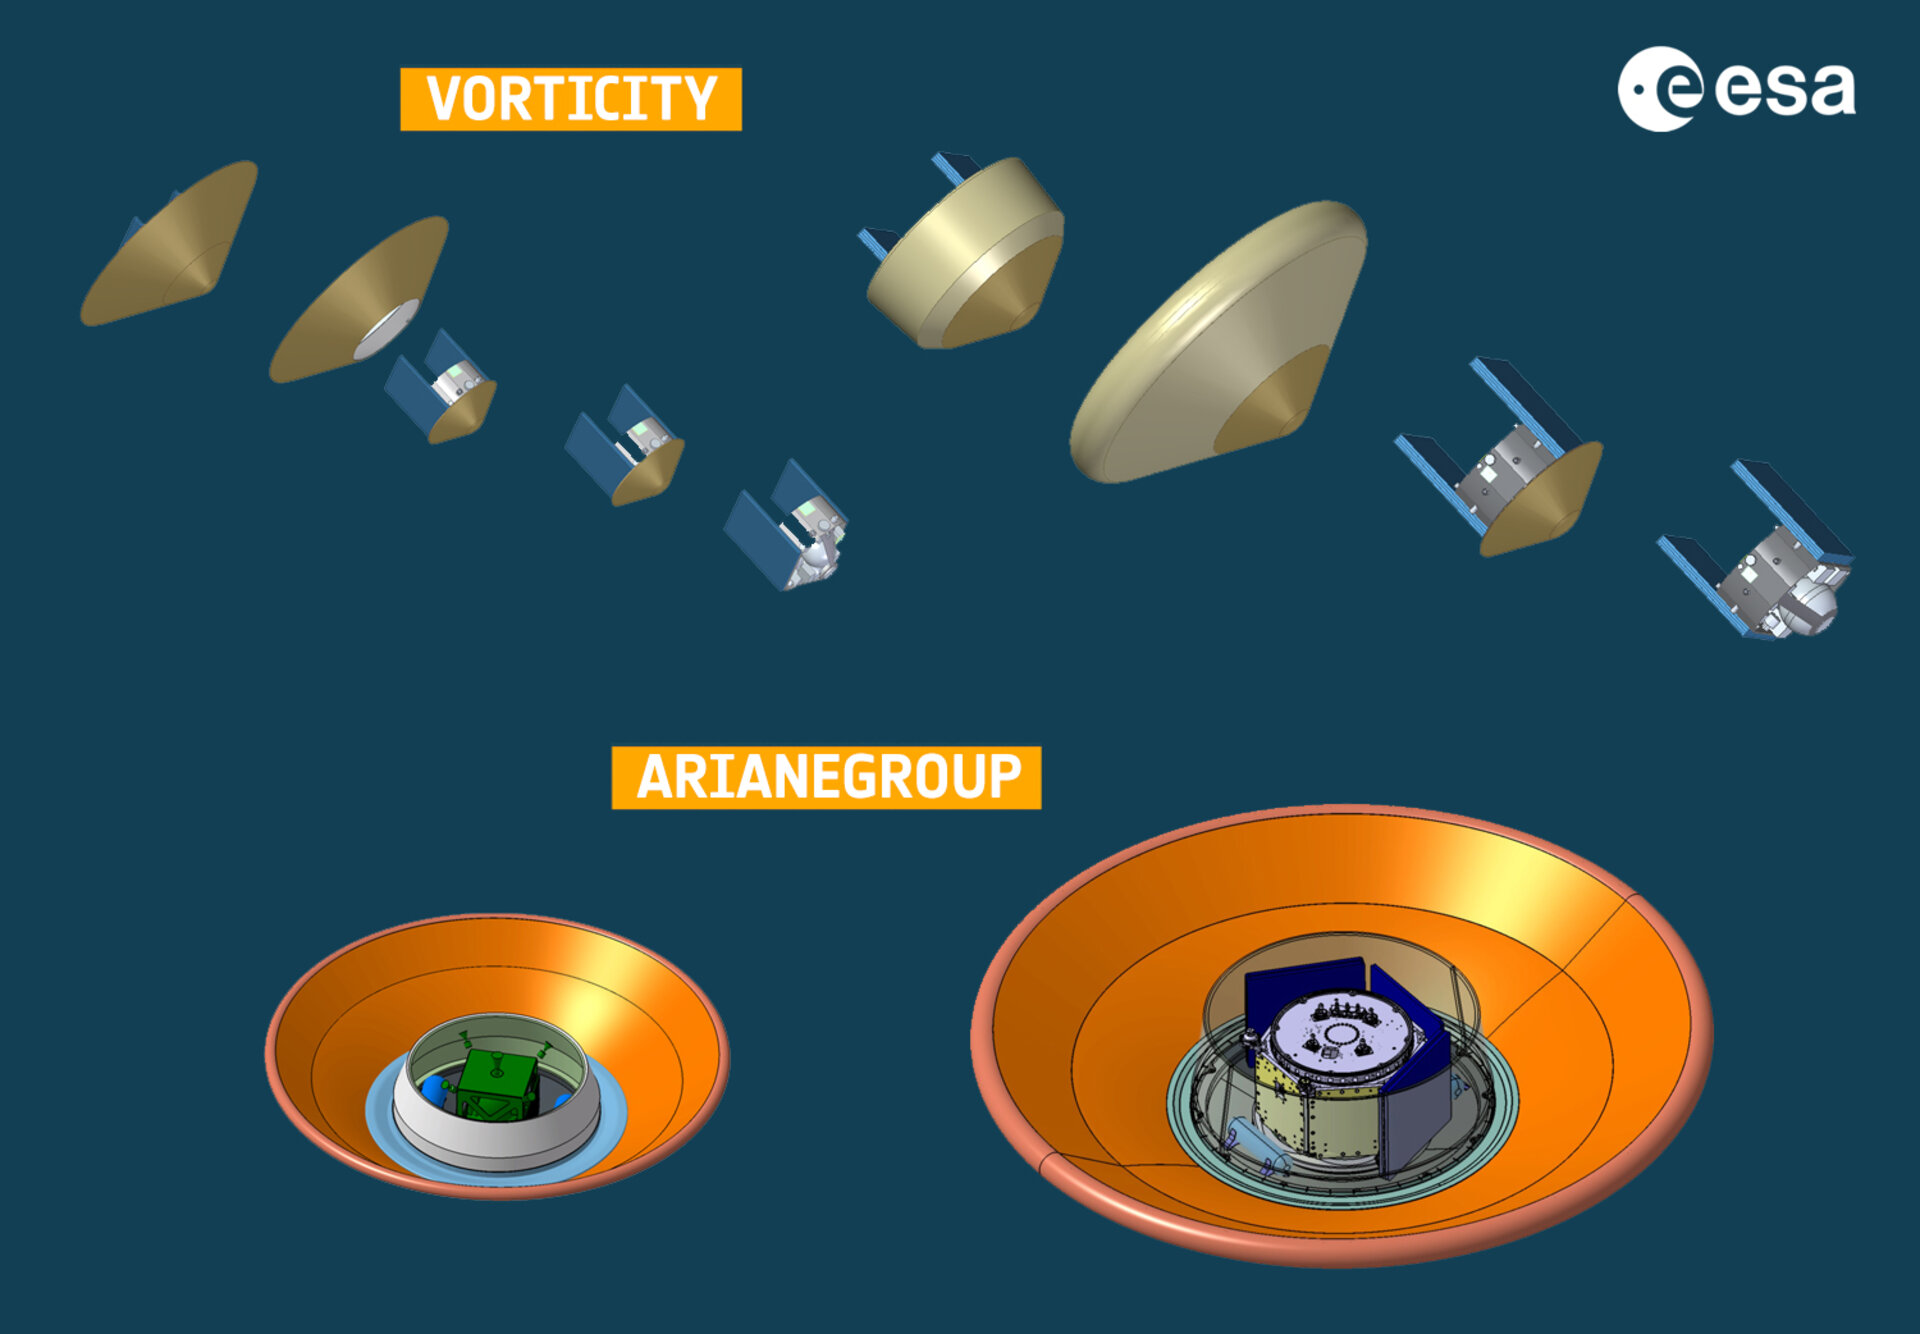 Views of mission concepts for Mars aerocapture